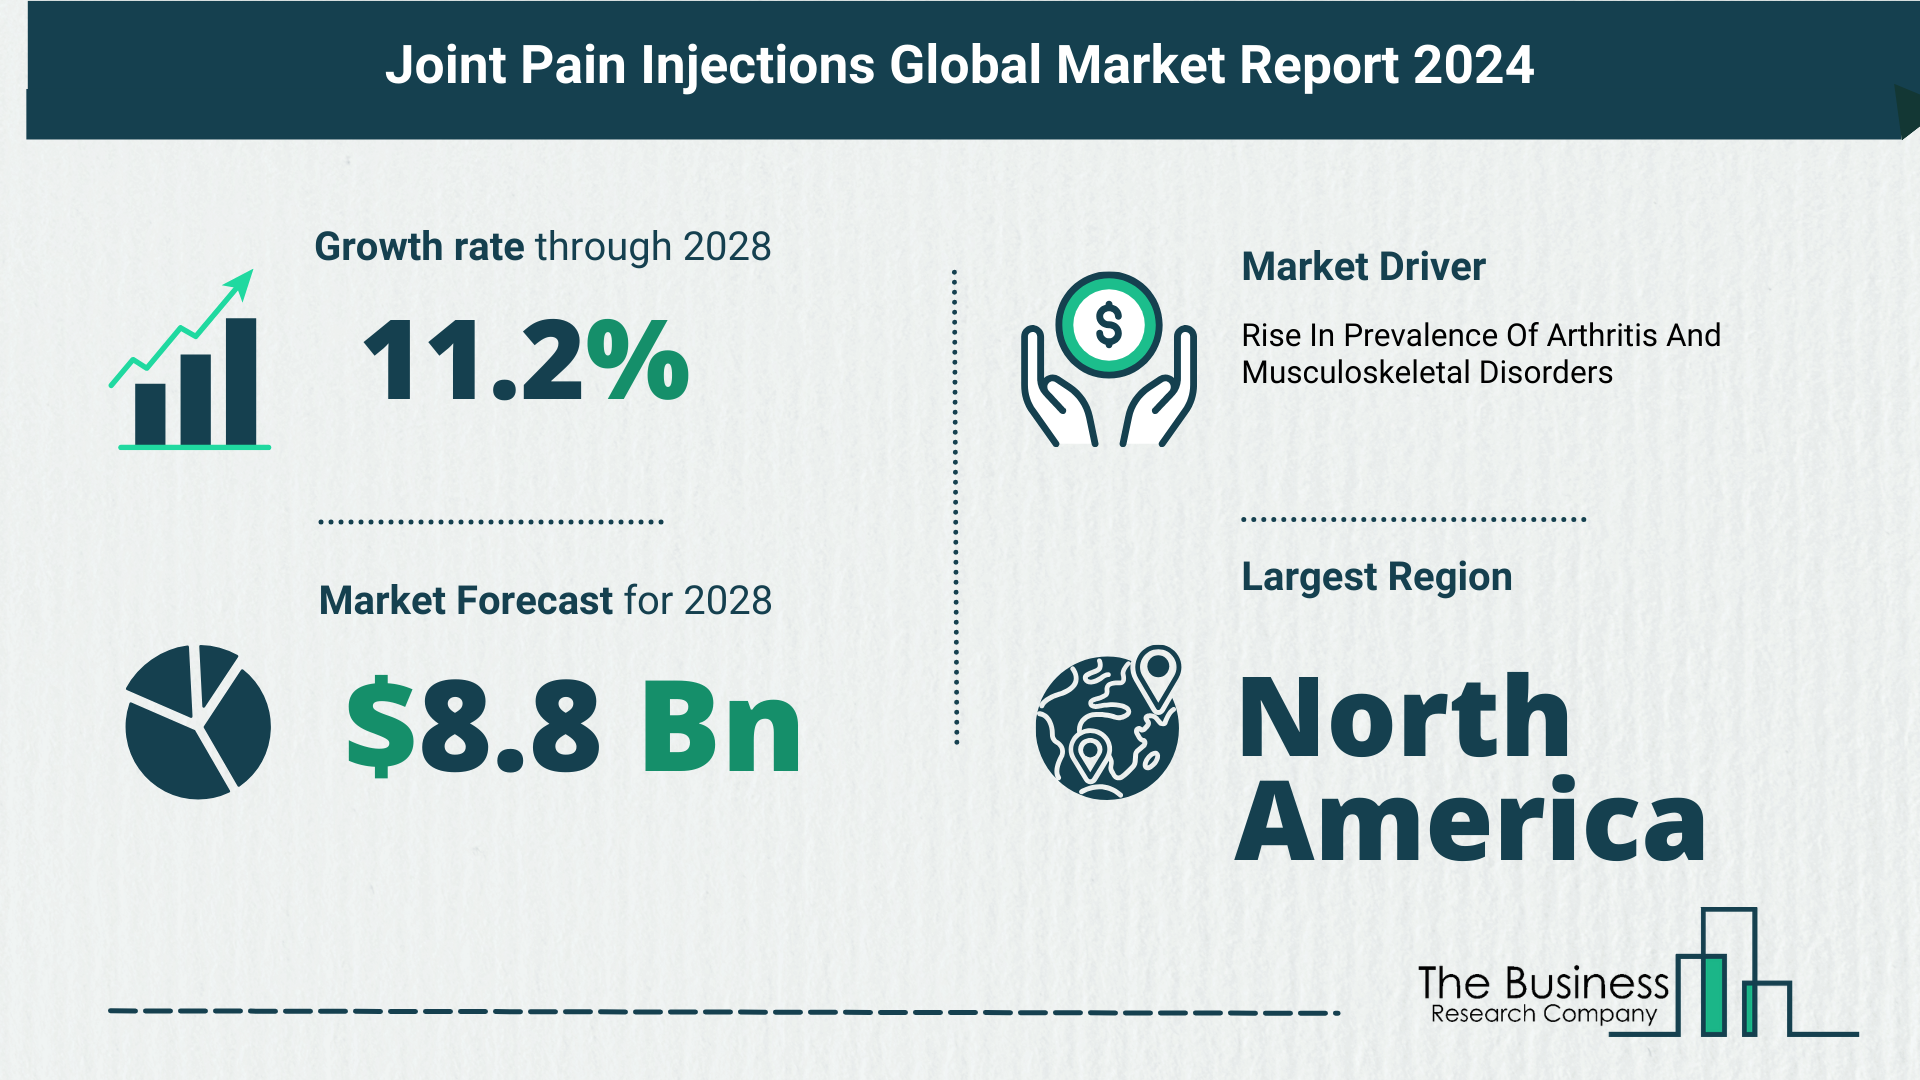 5 Takeaways From The Joint Pain Injections Market Overview 2024